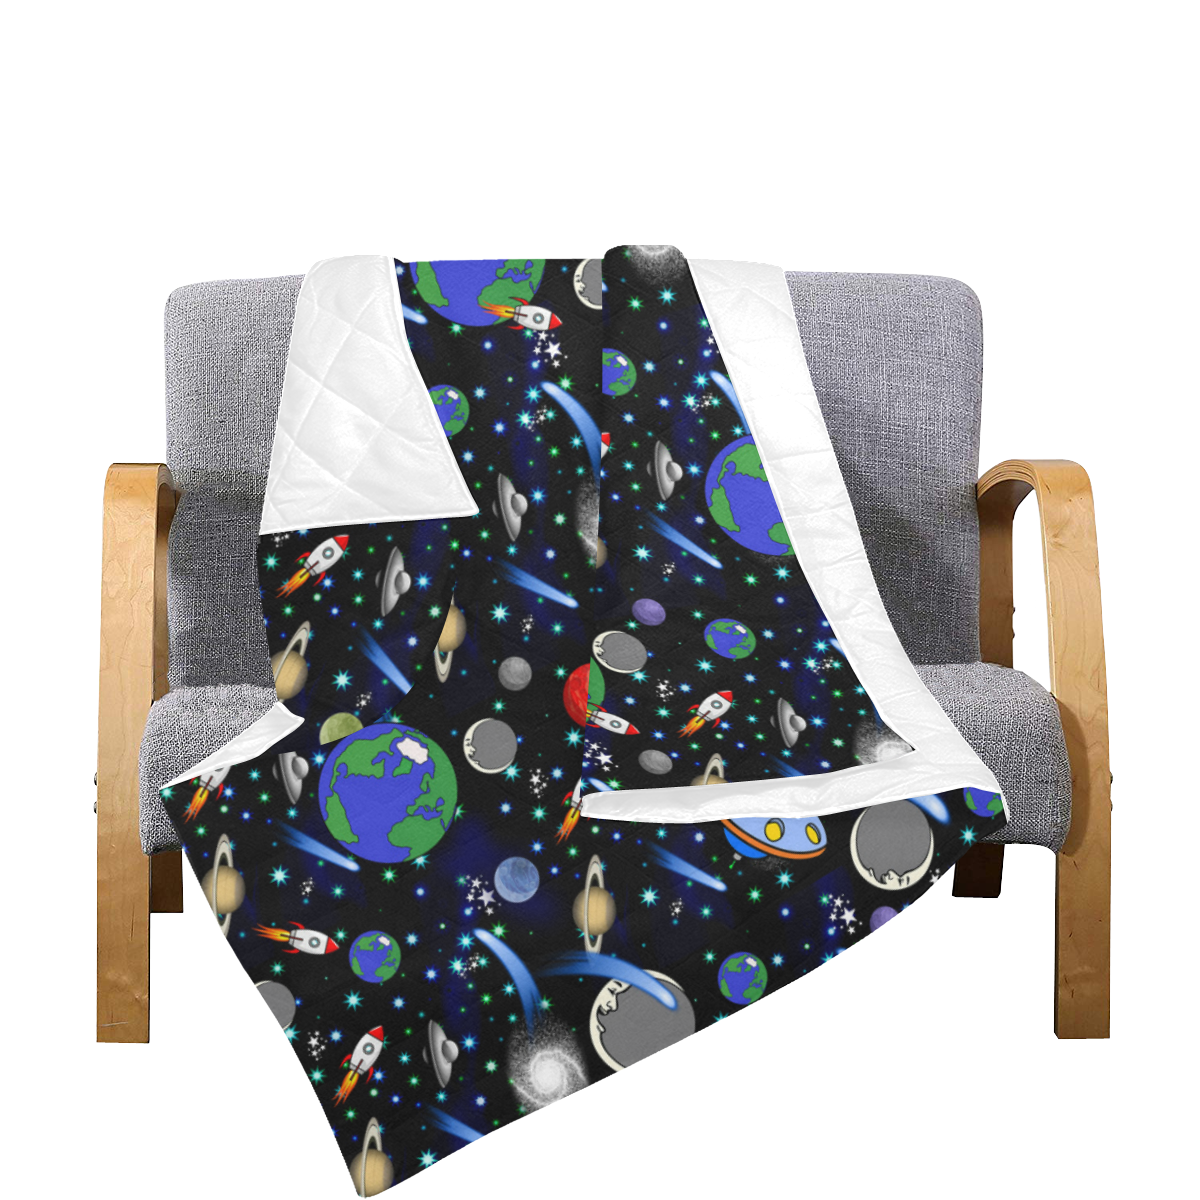 Galaxy Universe - Planets, Stars, Comets, Rockets Quilt 70"x80"